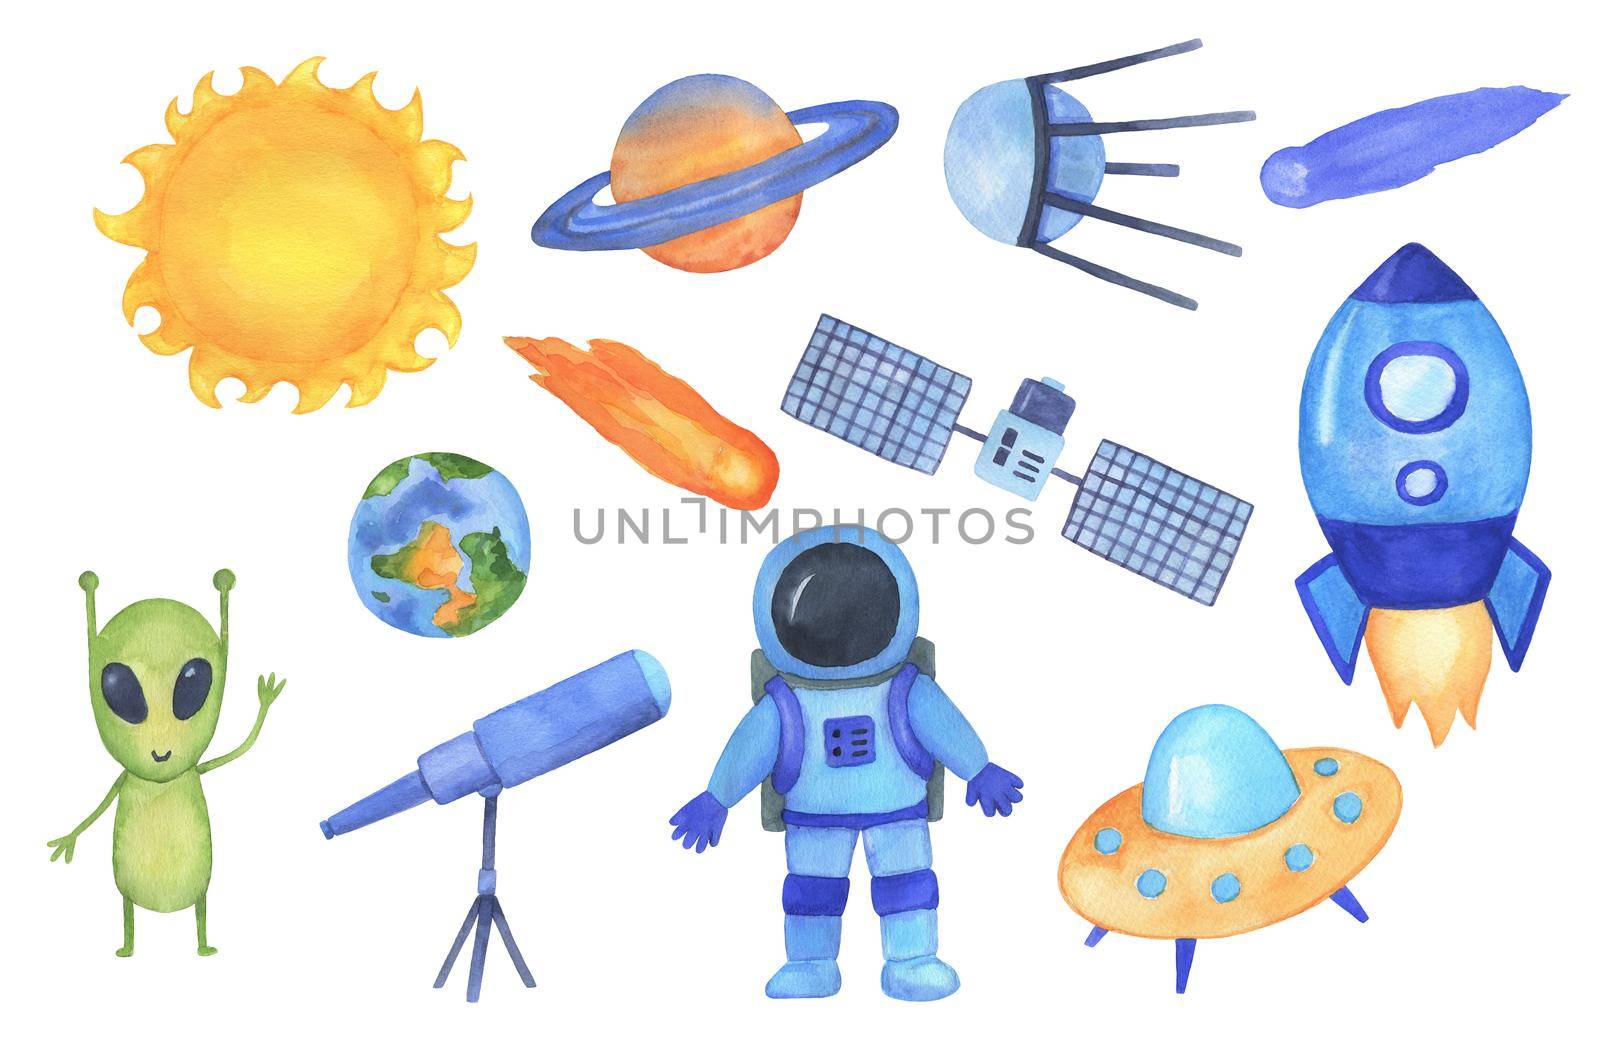 Space illustration set. Hand drawn childish spaceship, planets, astronaut and ufo. Watercolor galaxy for kids